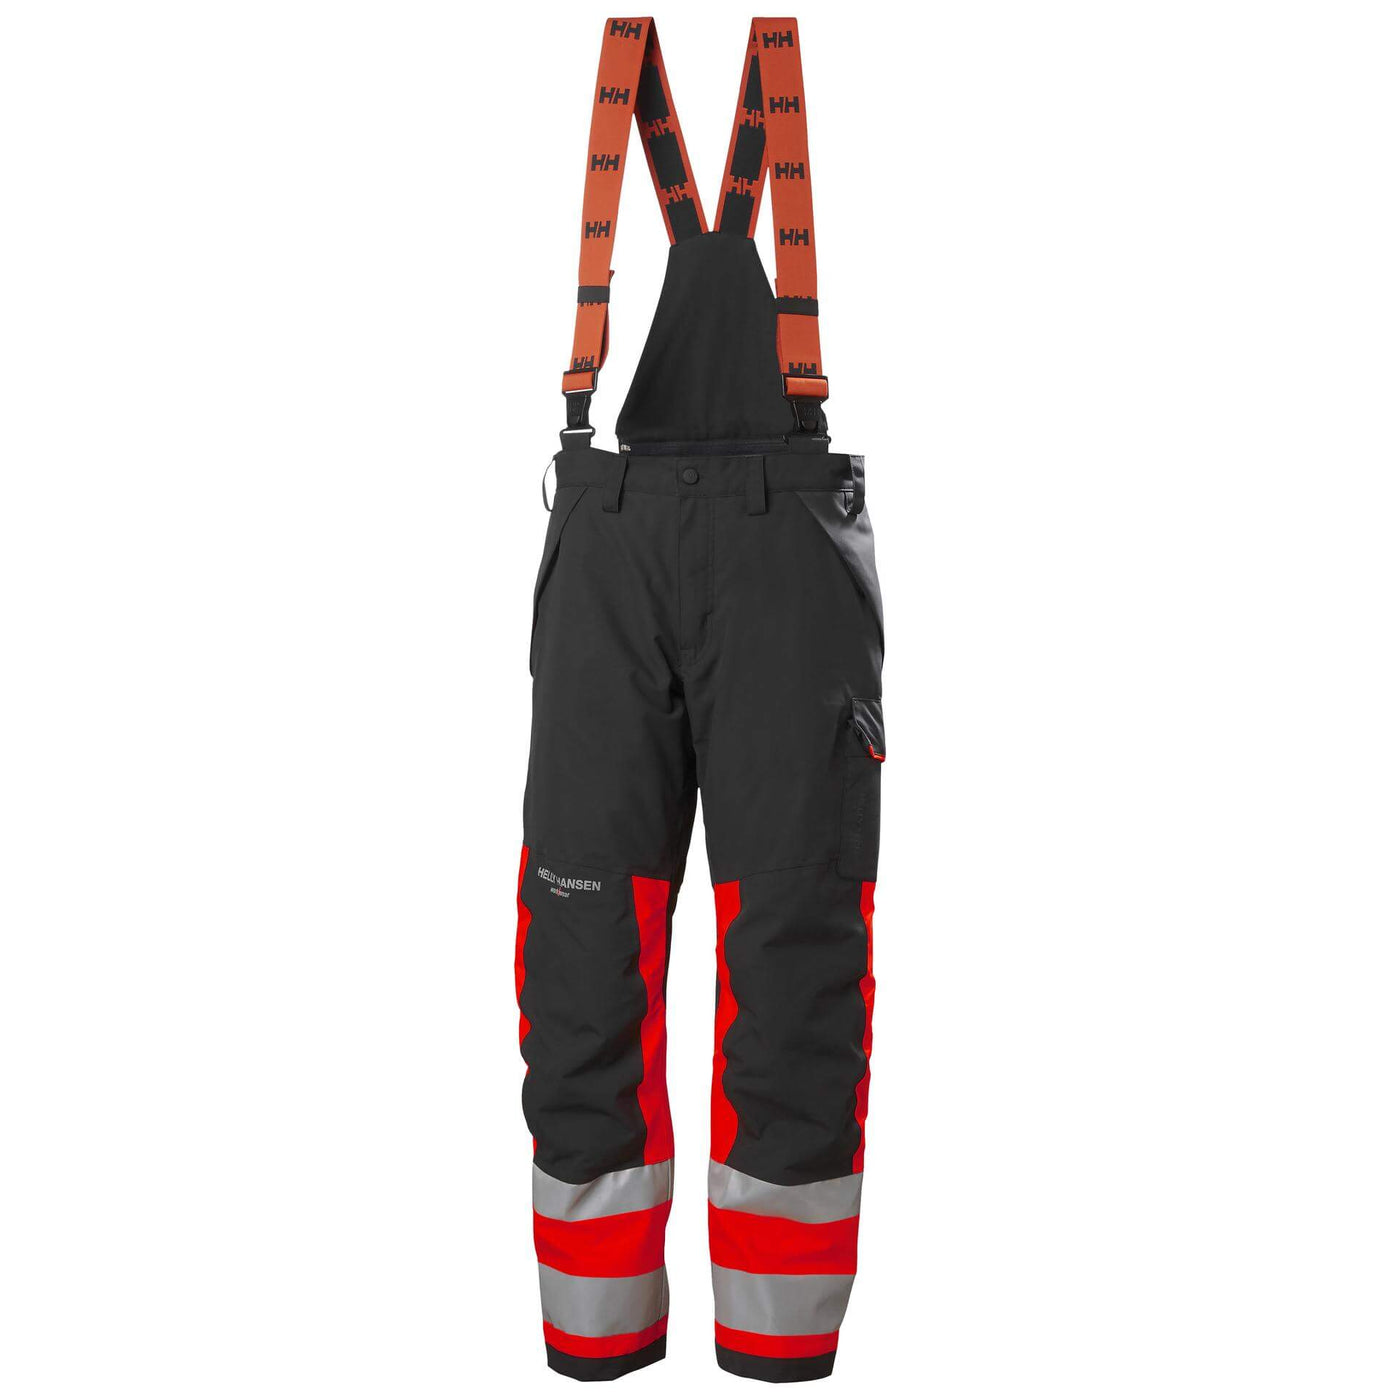 Helly Hansen Alna 2.0 Hi Vis Winter Insulated Bib and Brace Trousers Class 1 Red/Ebony 1 Front #colour_red-ebony